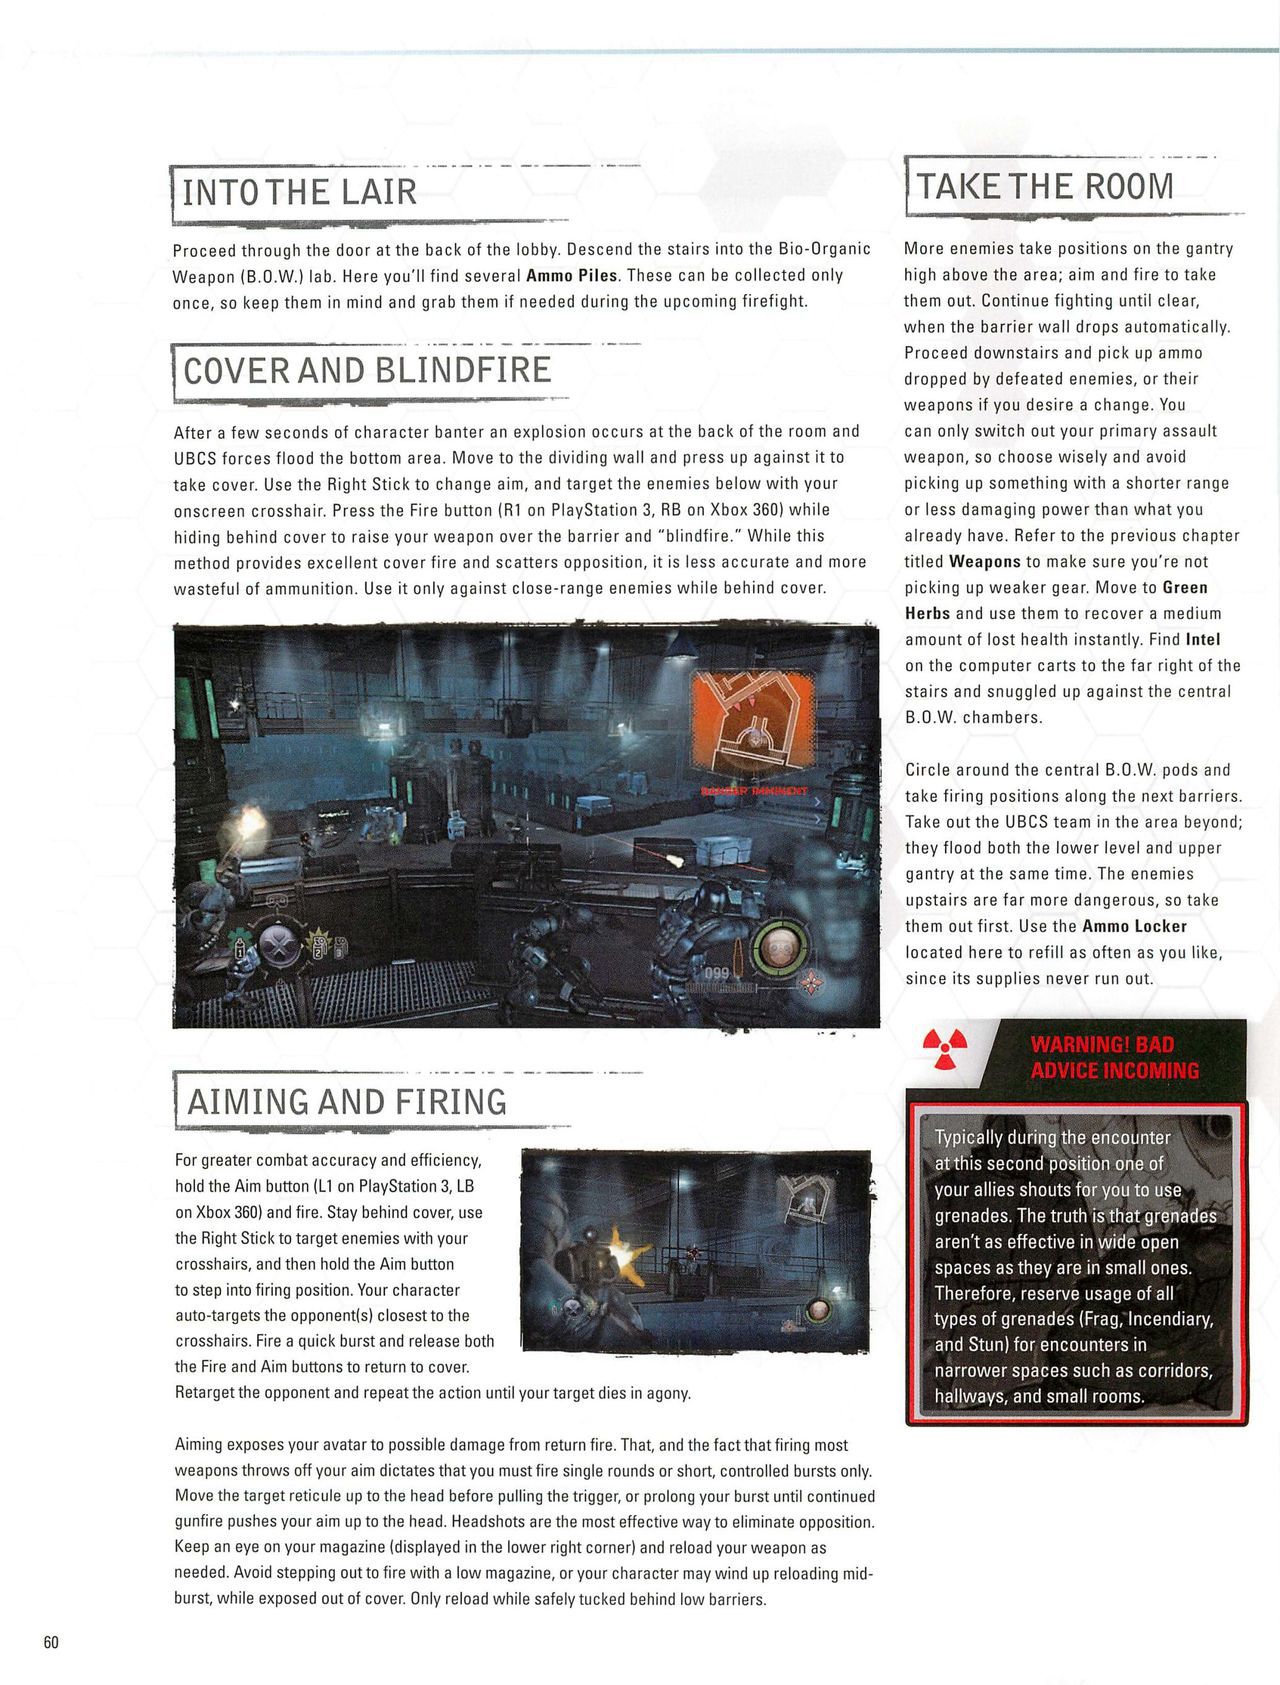 Resident Evil: Operation Raccoon City Official Strategy Guide (watermarked) 62